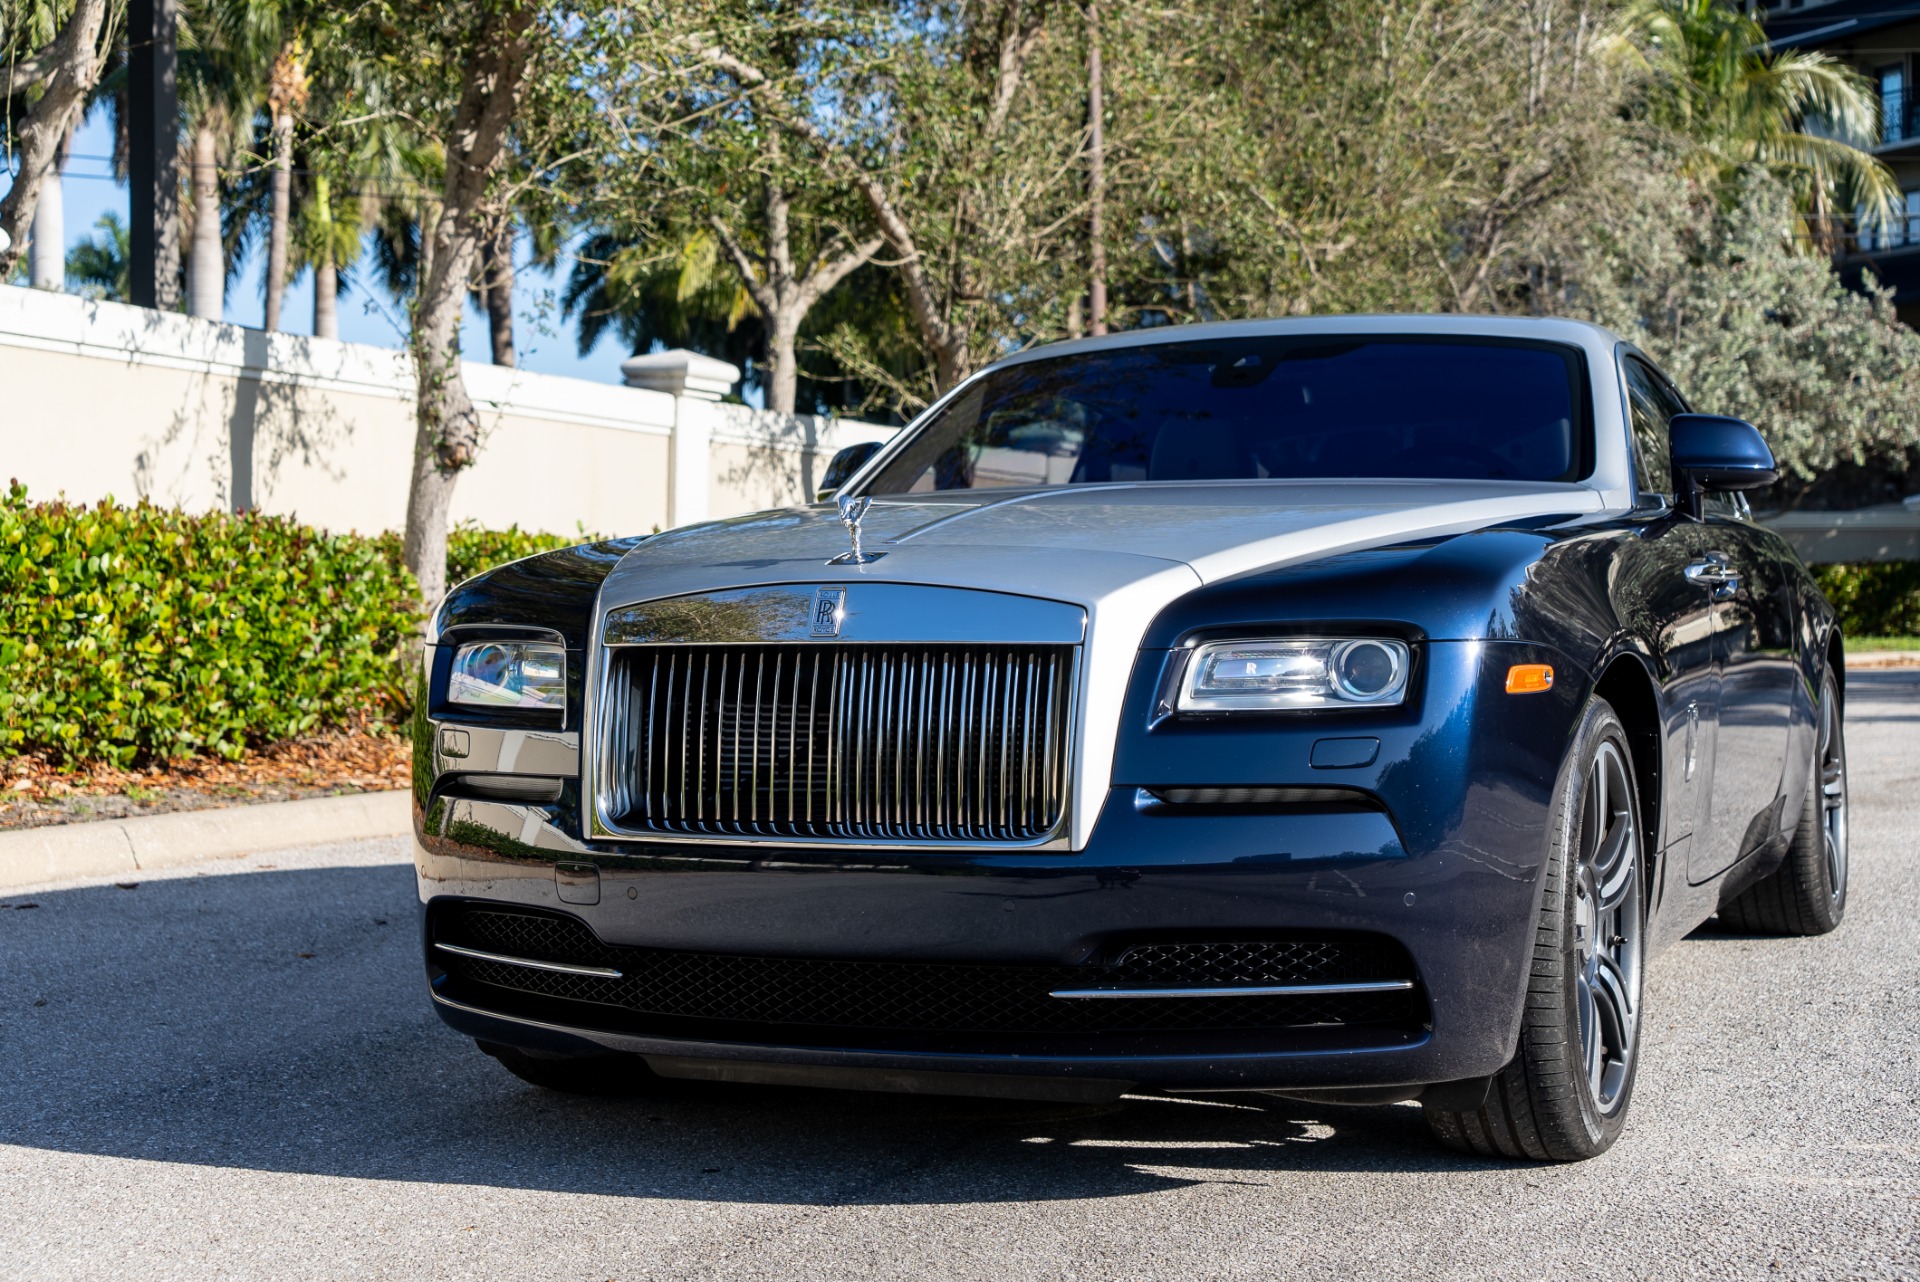 Used 2015 RollsRoyce Wraith For Sale Sold  iLusso Stock X85147